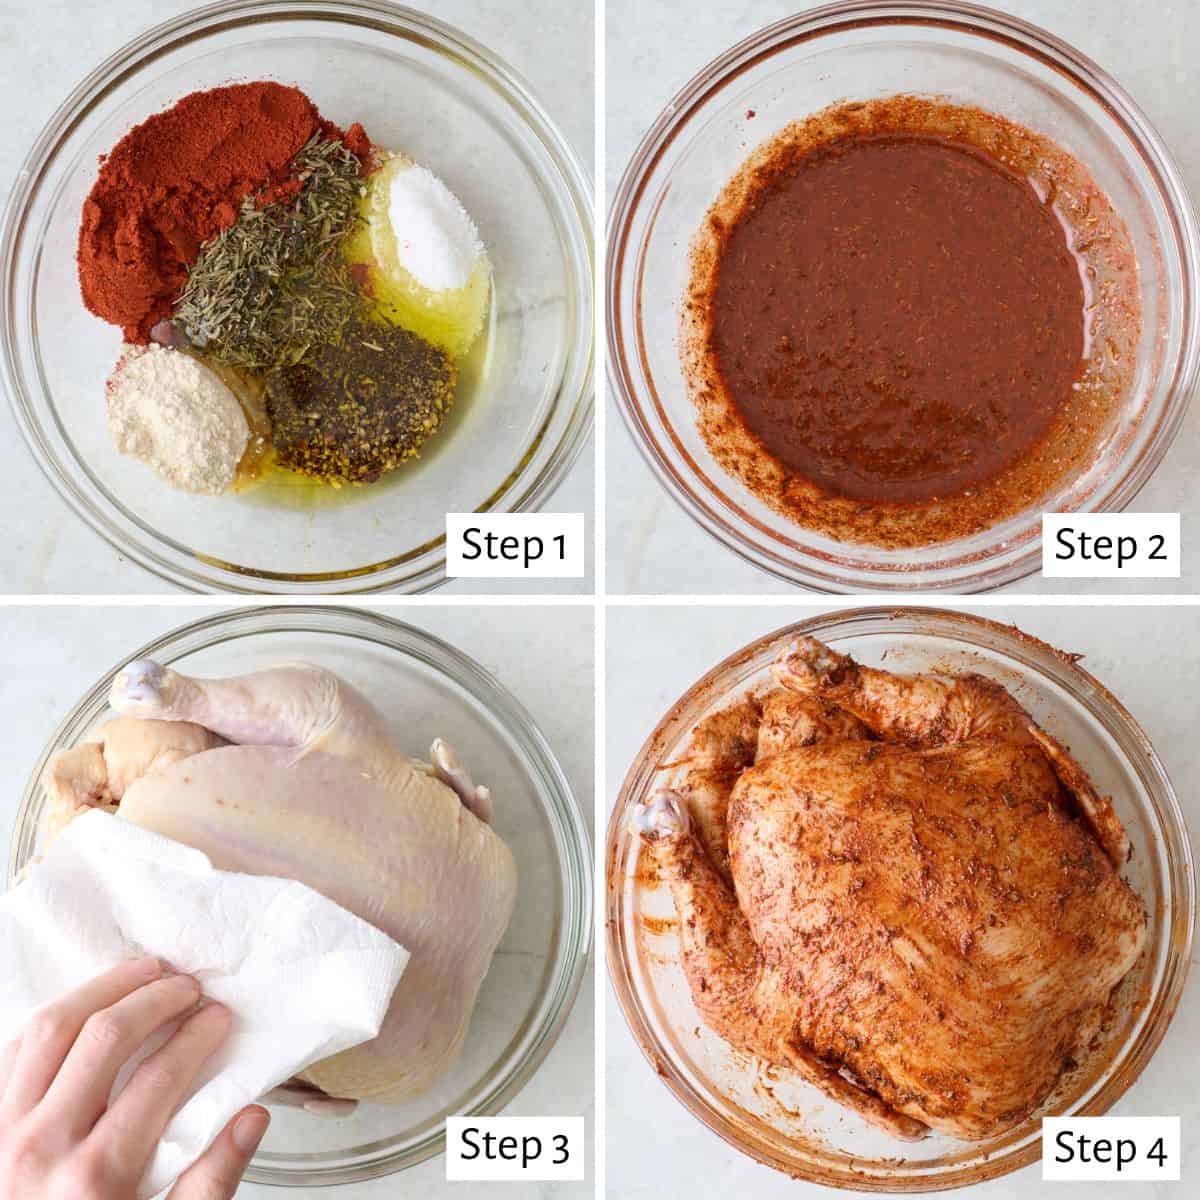 4-image collage seasoning chicken: 1 - Oil and spices in a bowl before combining; 2 - After combining; 3 - Drying chicken with paper towels; 4 - Chicken after being coated with seasoned oil.